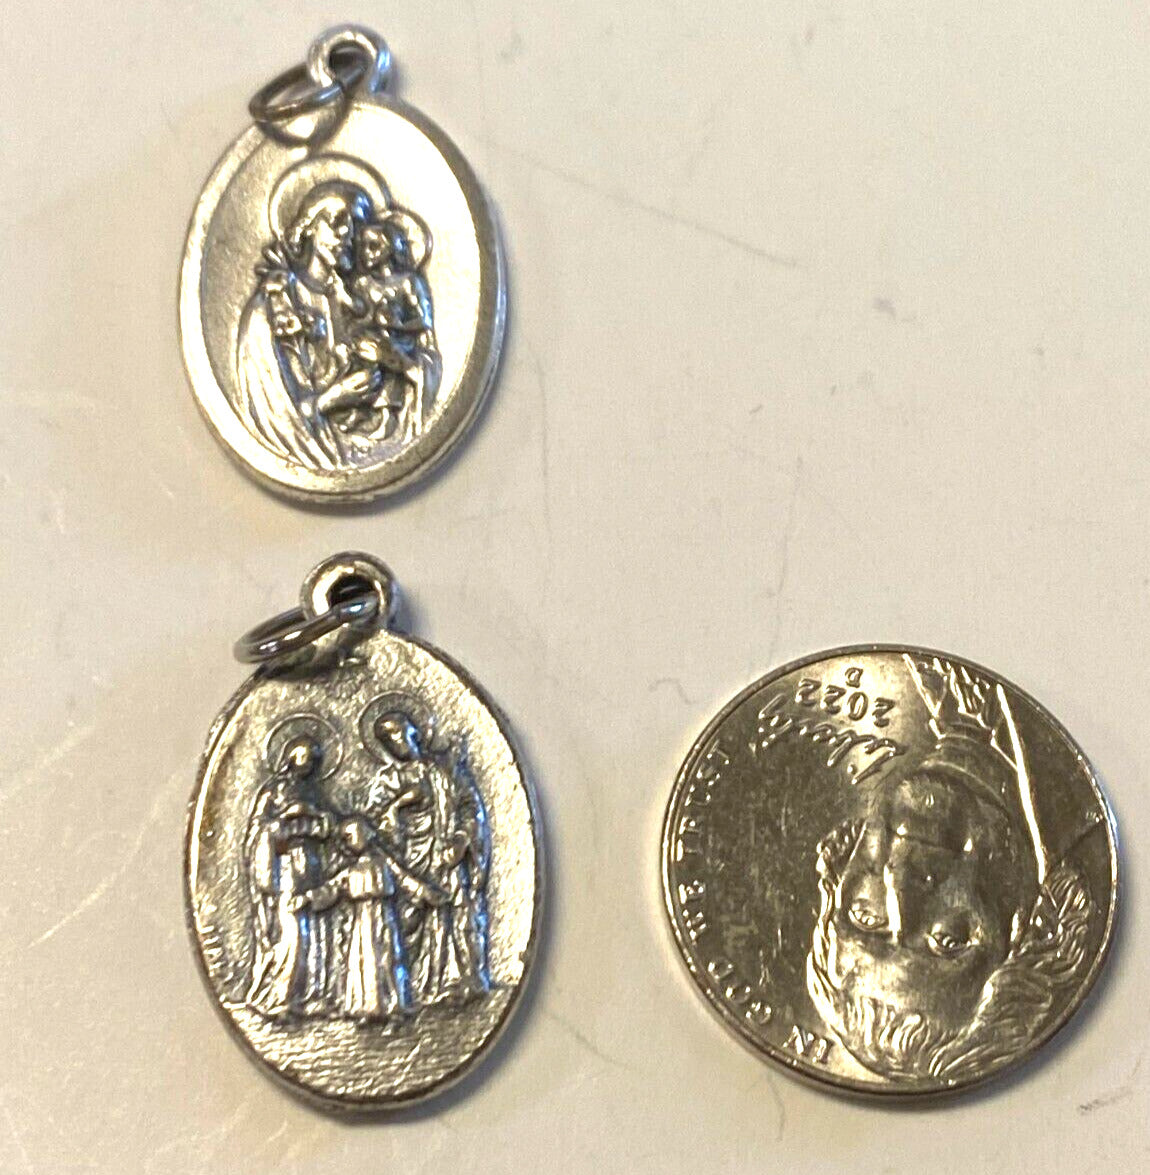 Saint Joseph/ Holy Family Medal, New from Italy - Bob and Penny Lord